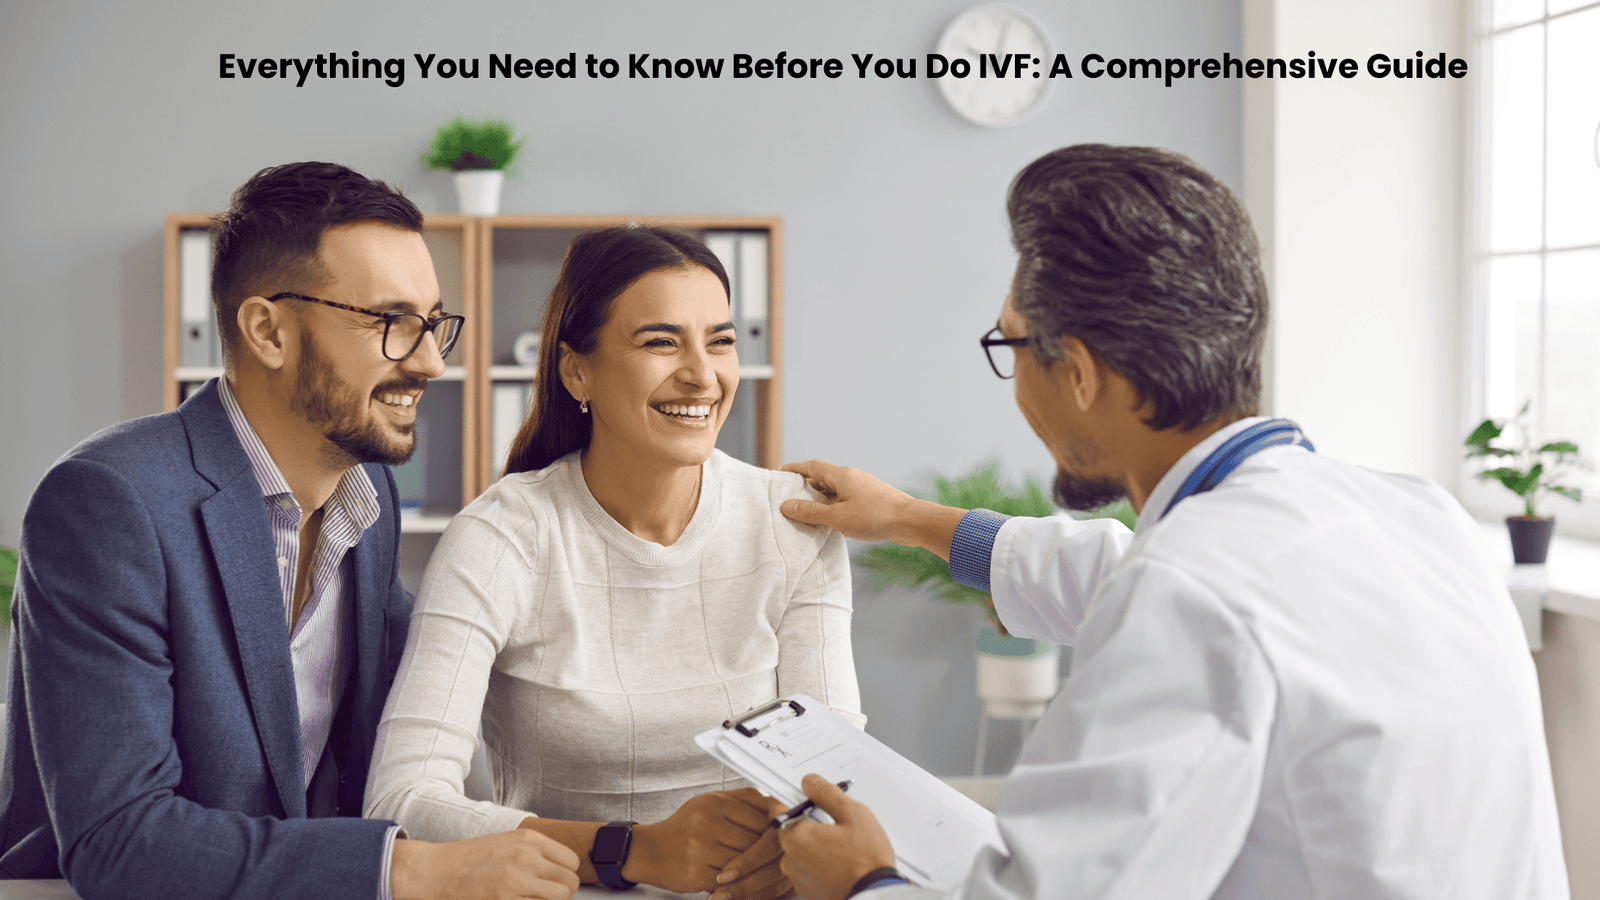 Everything You Need to Know Before You Do IVF: A Comprehensive Guide